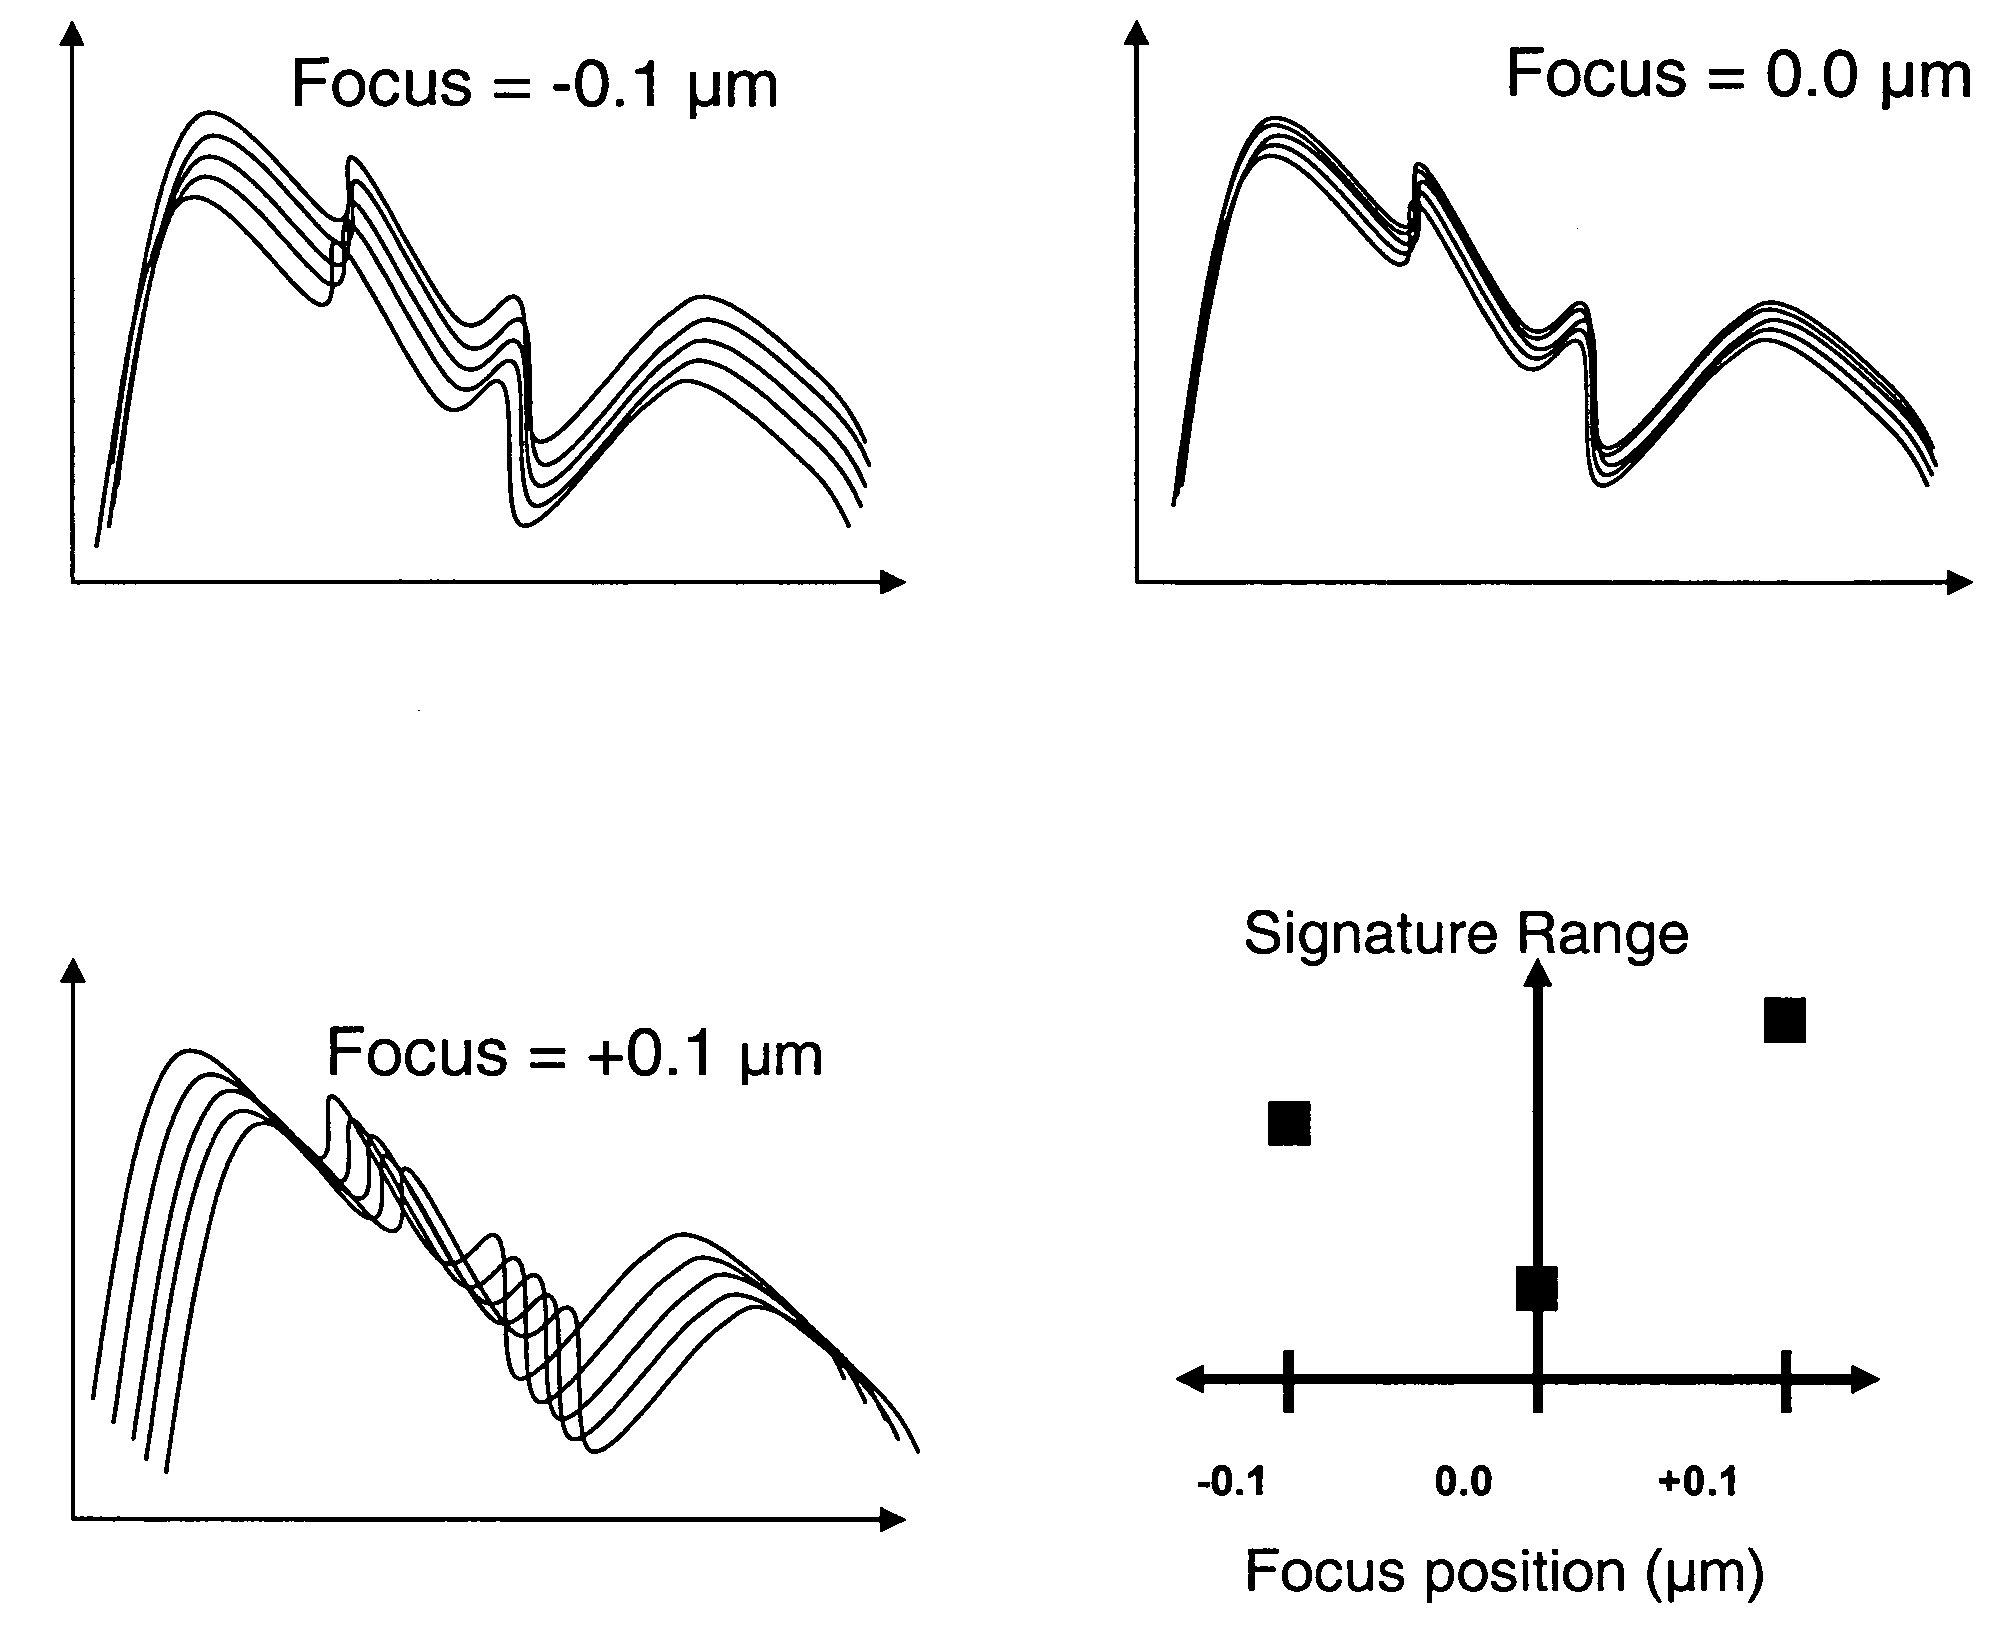 Determination of center of focus by parameter variability analysis